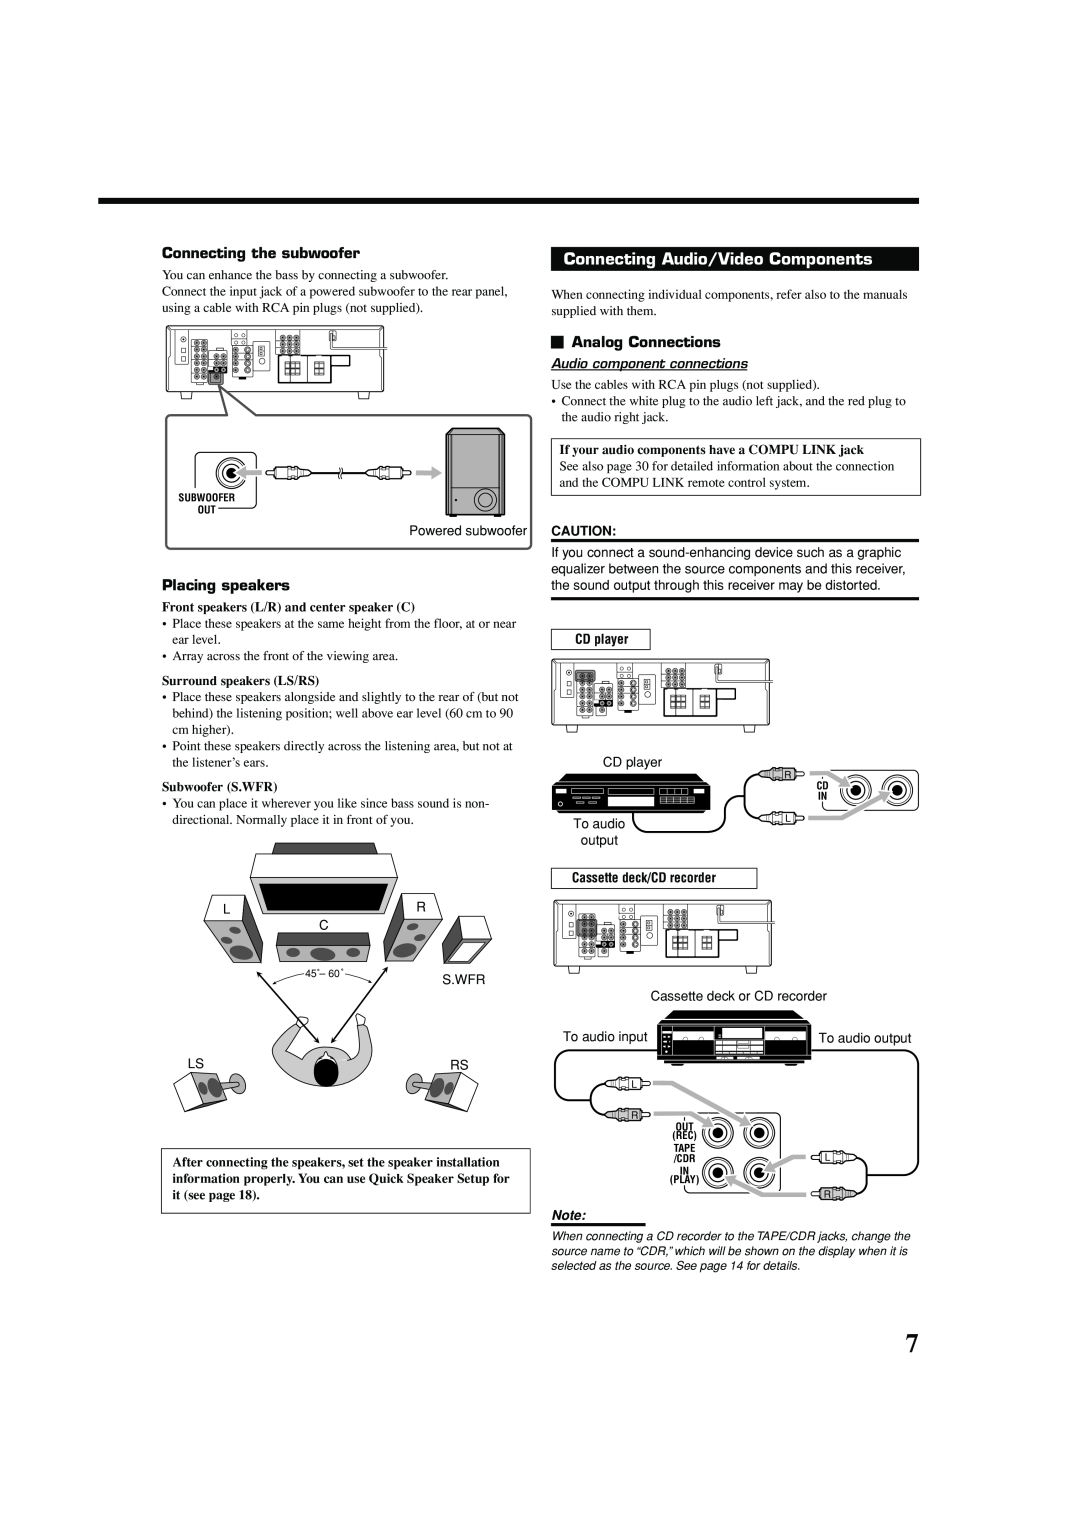 JVC LVT1140-007A manual Connecting Audio/Video Components, Connecting the subwoofer, Placing speakers, Analog Connections 